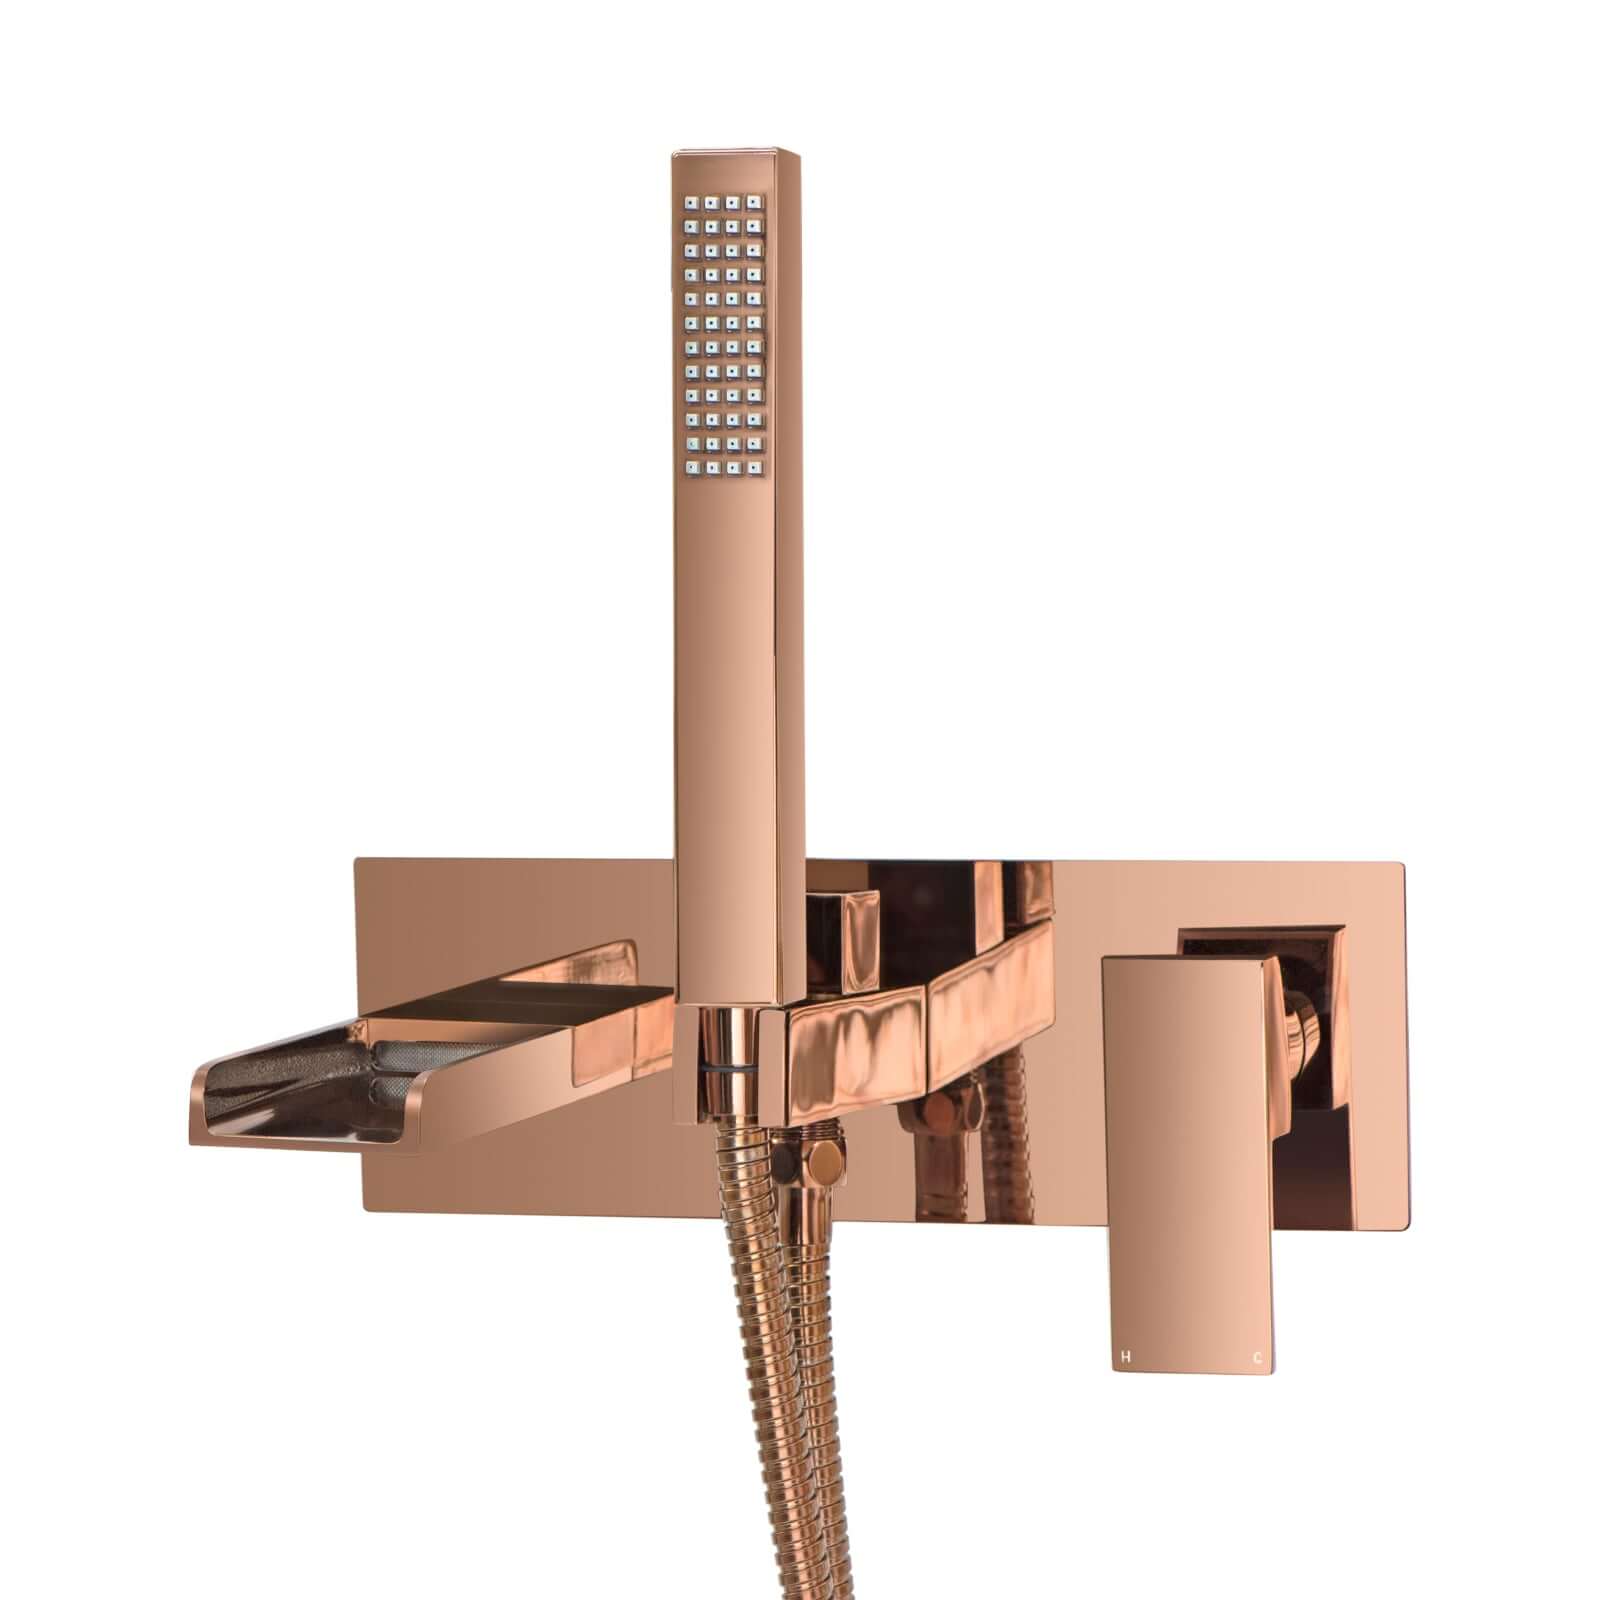 Plaza wall mounted shower mixer - rose gold - Taps